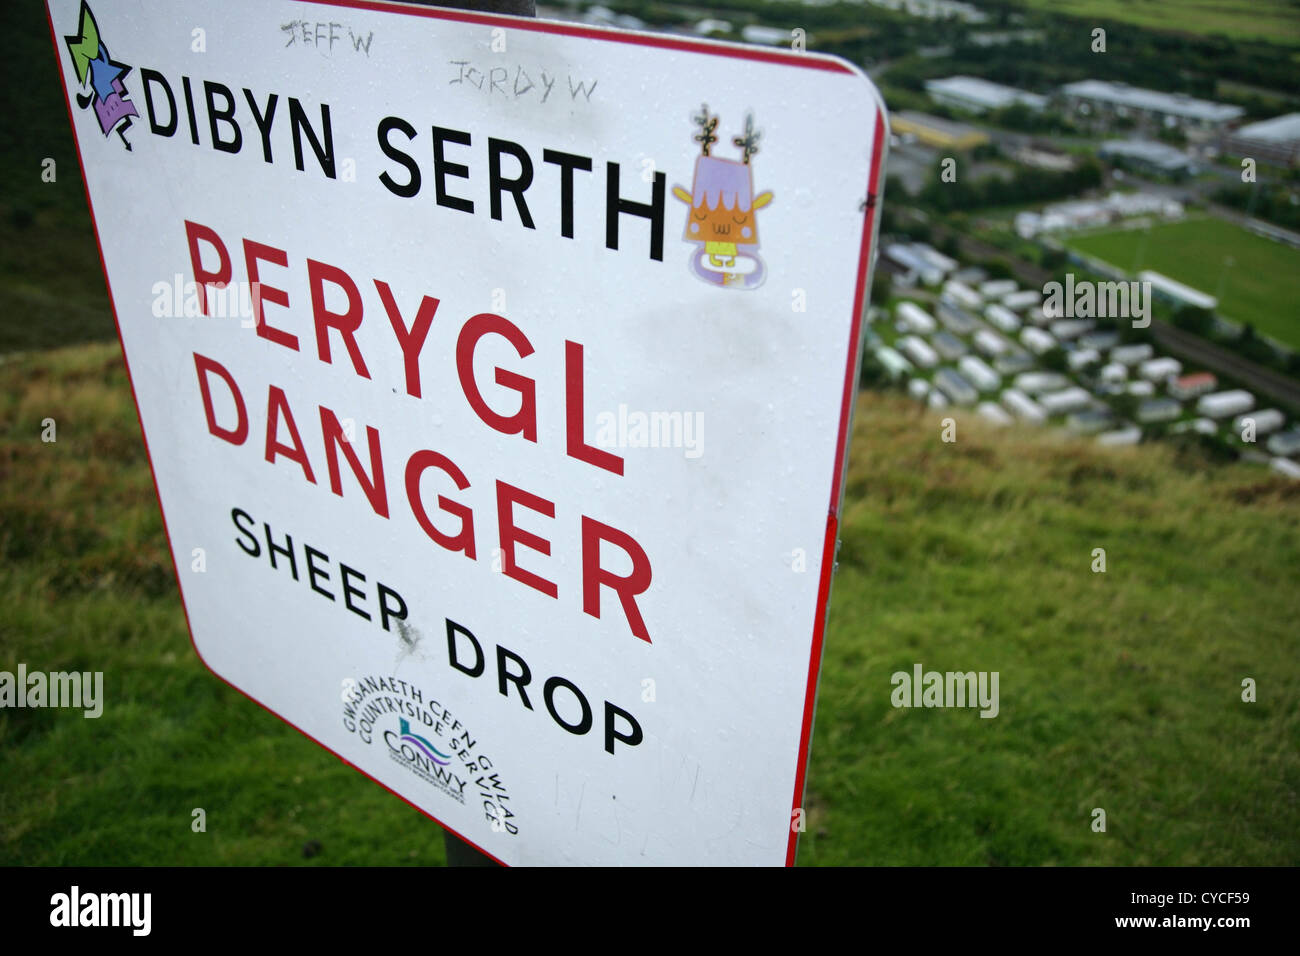 Sheer Drop warning sign changed to 'Sheep Drop' on the summit of Conwy Mountain, North Wales. Stock Photo